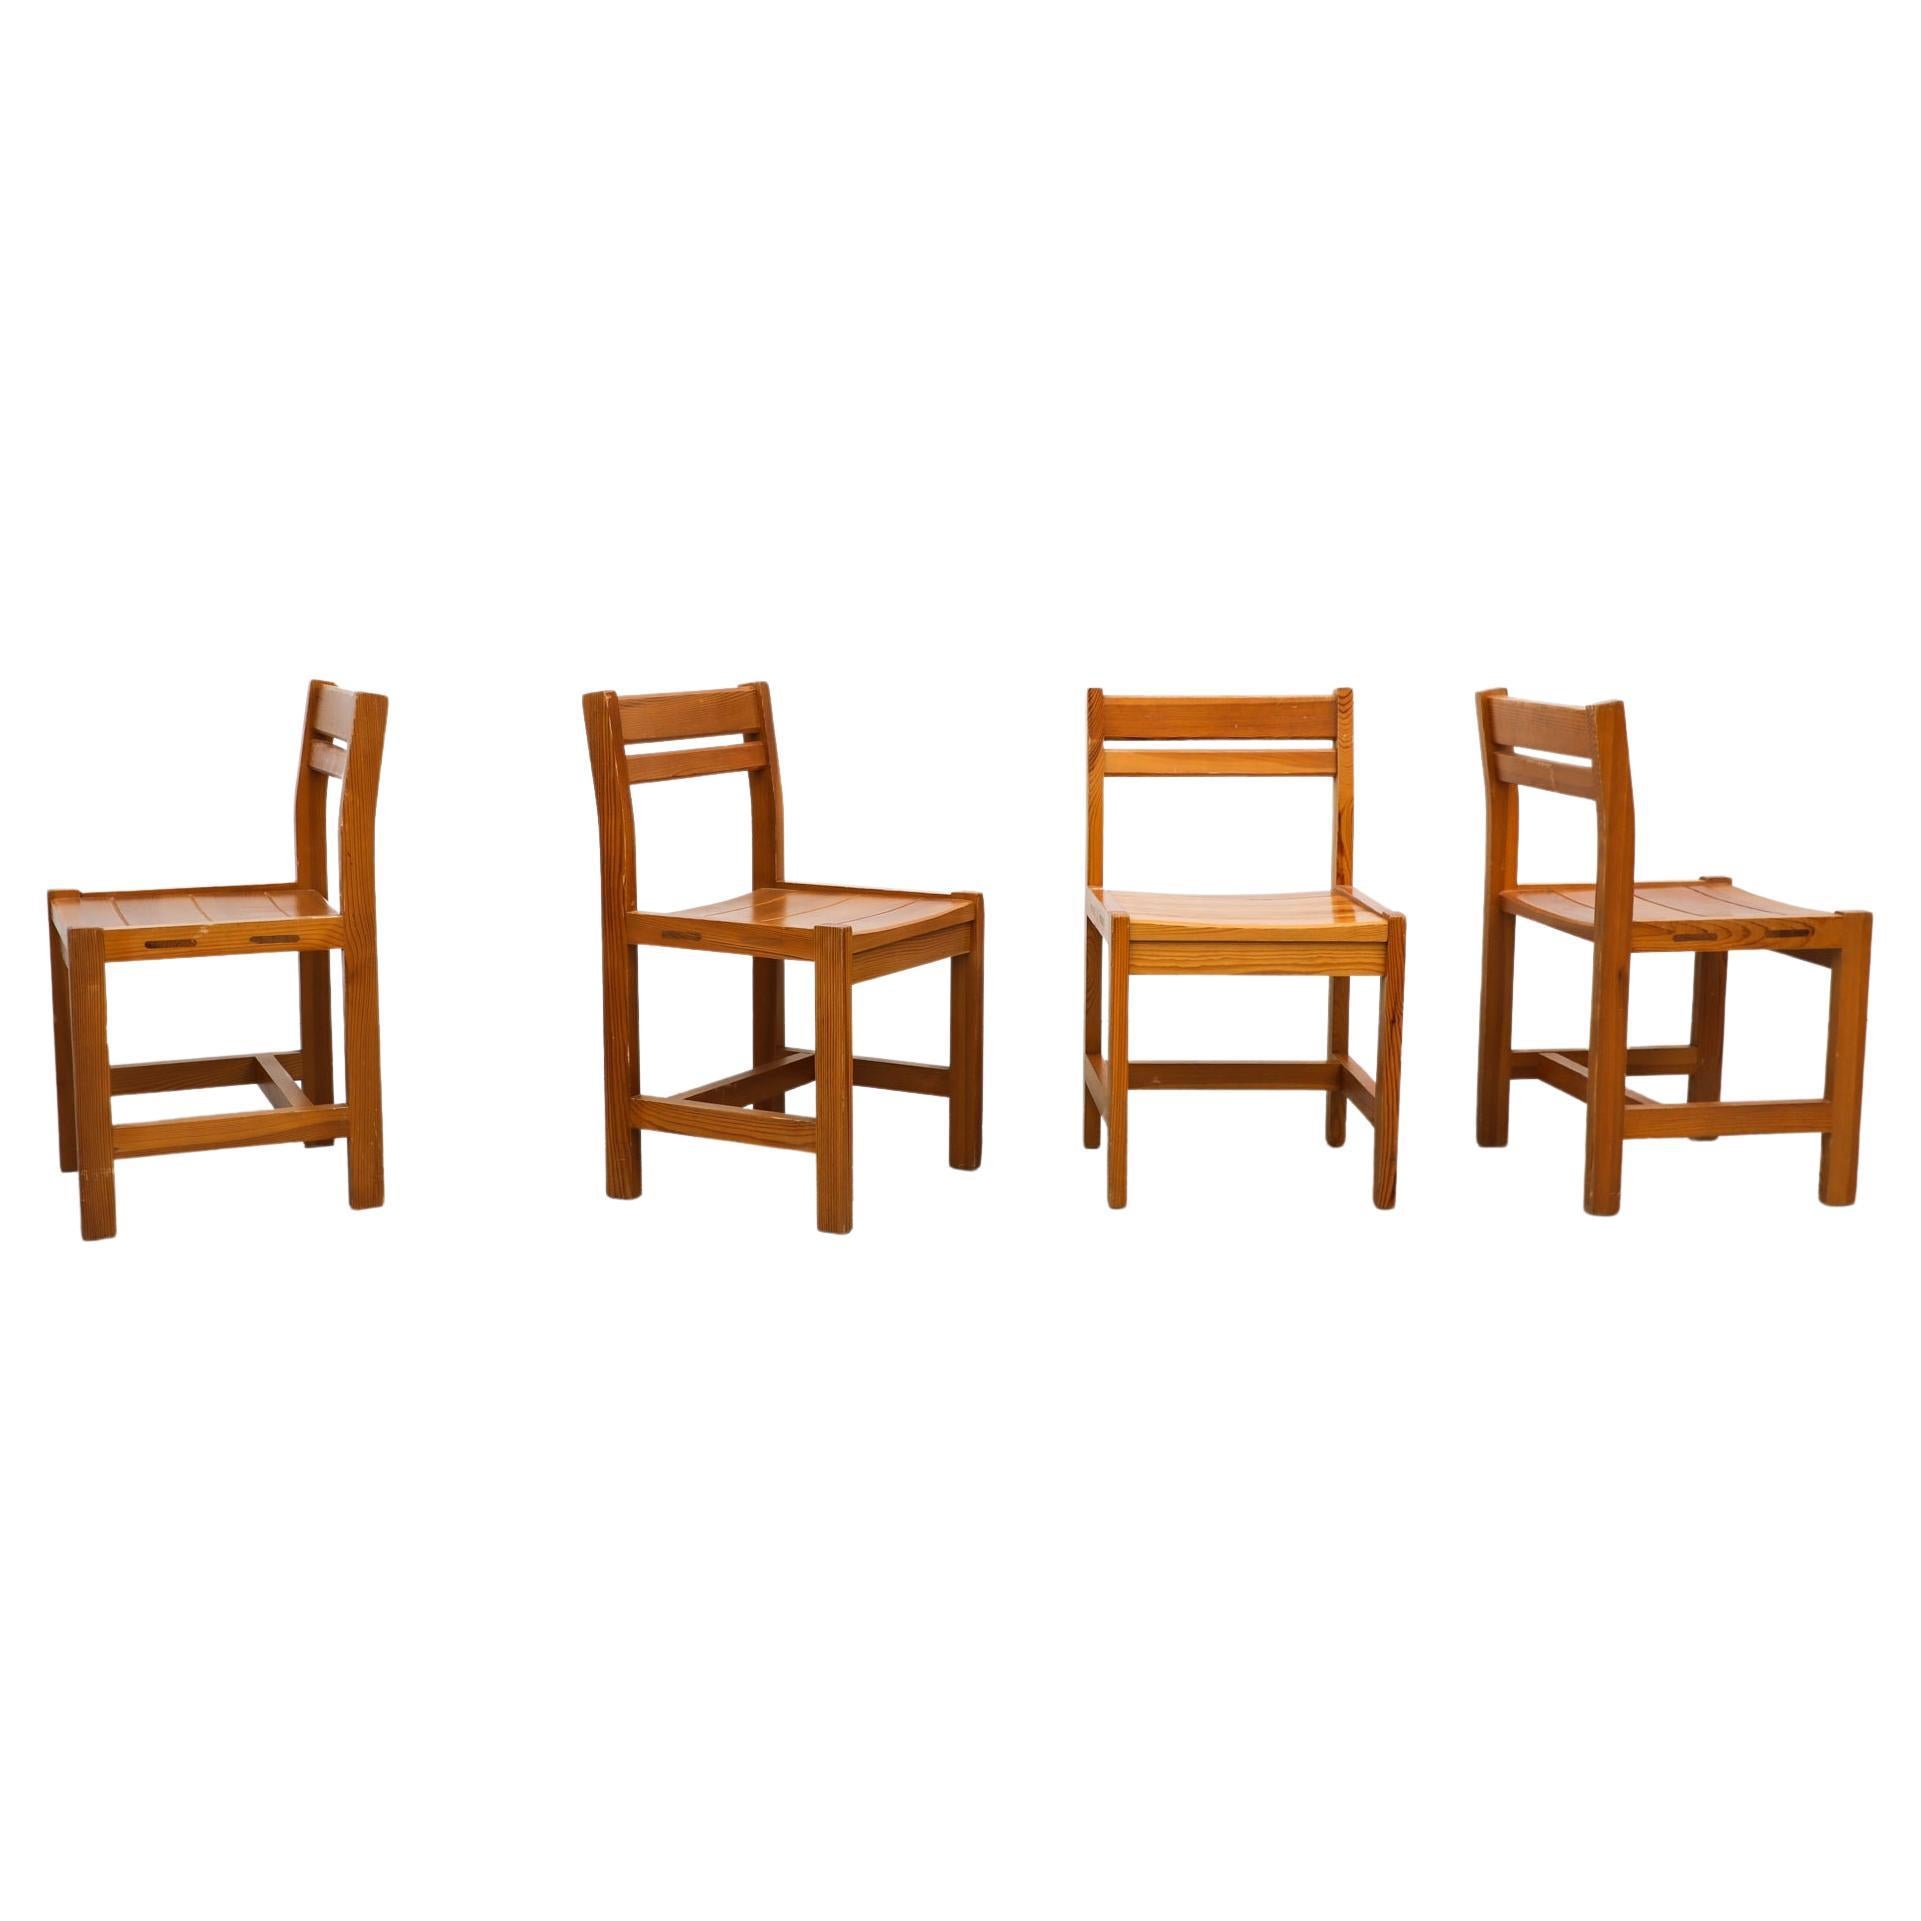 Set of 4 Tapiovaara Inspired Slatted Pine Dining Chairs by Lundia w/ Cube Frames